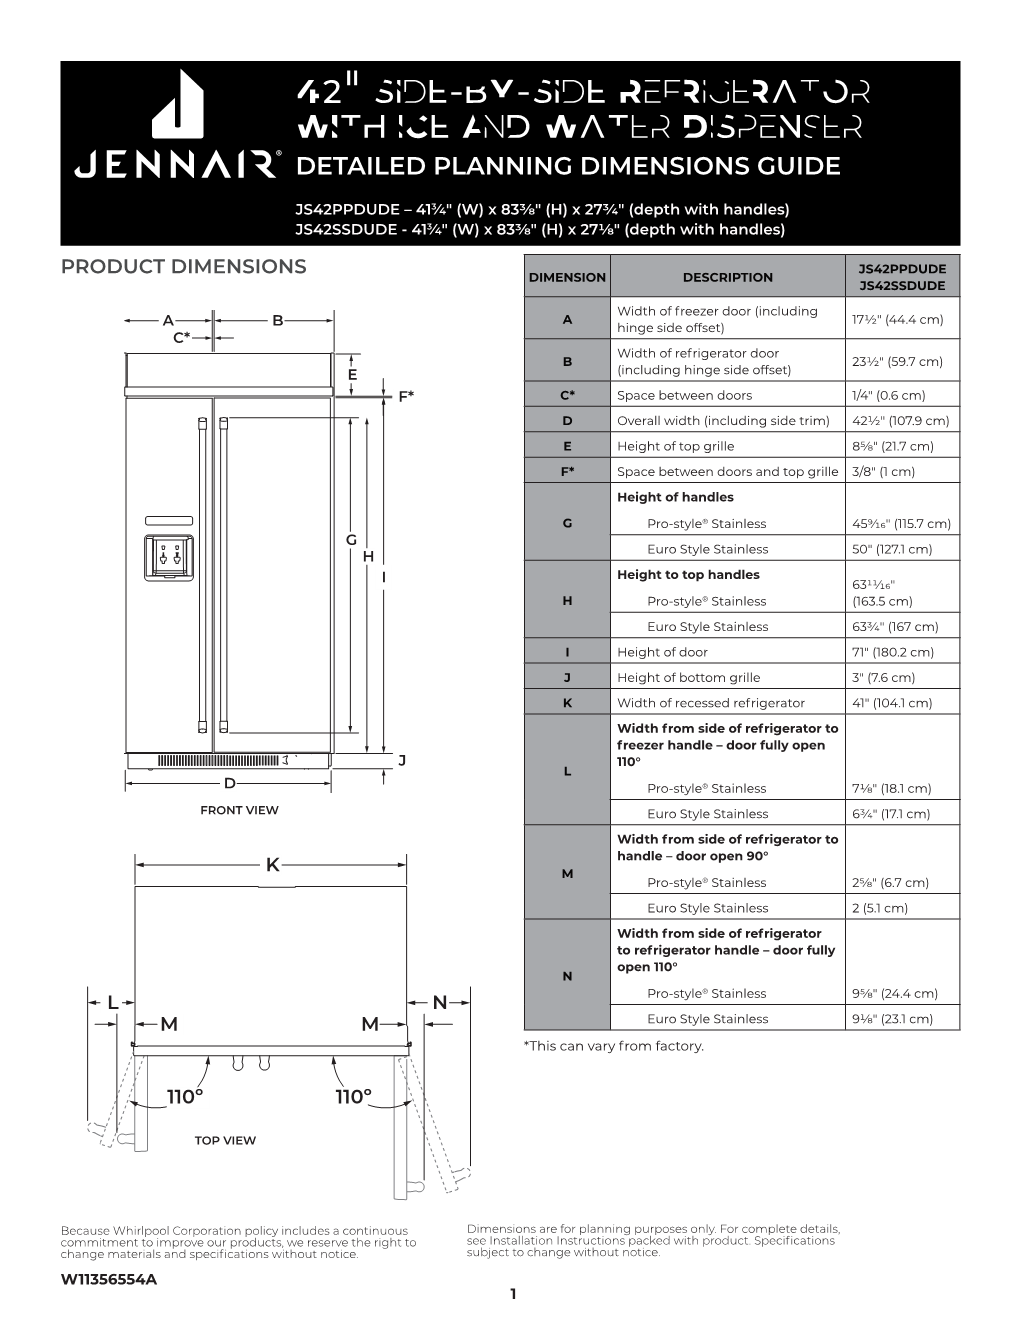 42" Side-By-Side Refrigerator with Ice and Water Dispenser Detailed Planning Dimensions Guide